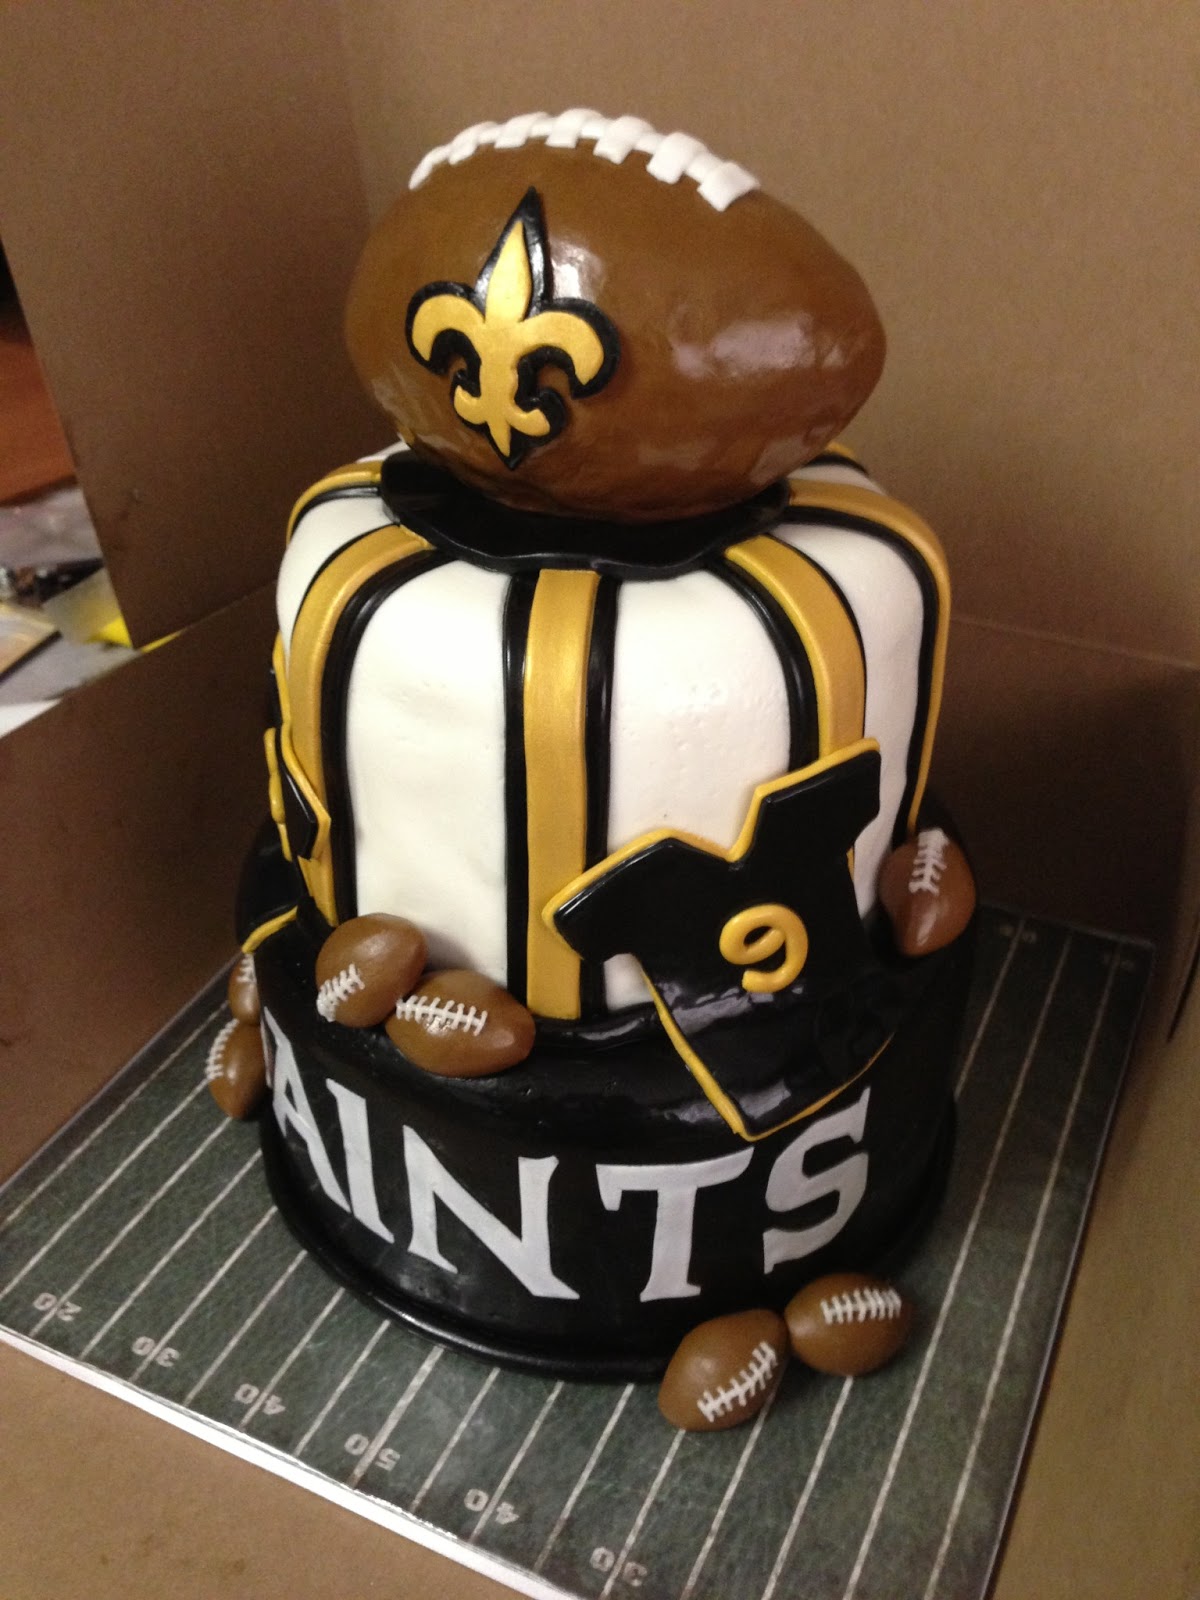 Cakes by Mindy: New Orleans Saints Cake 6" & 8"